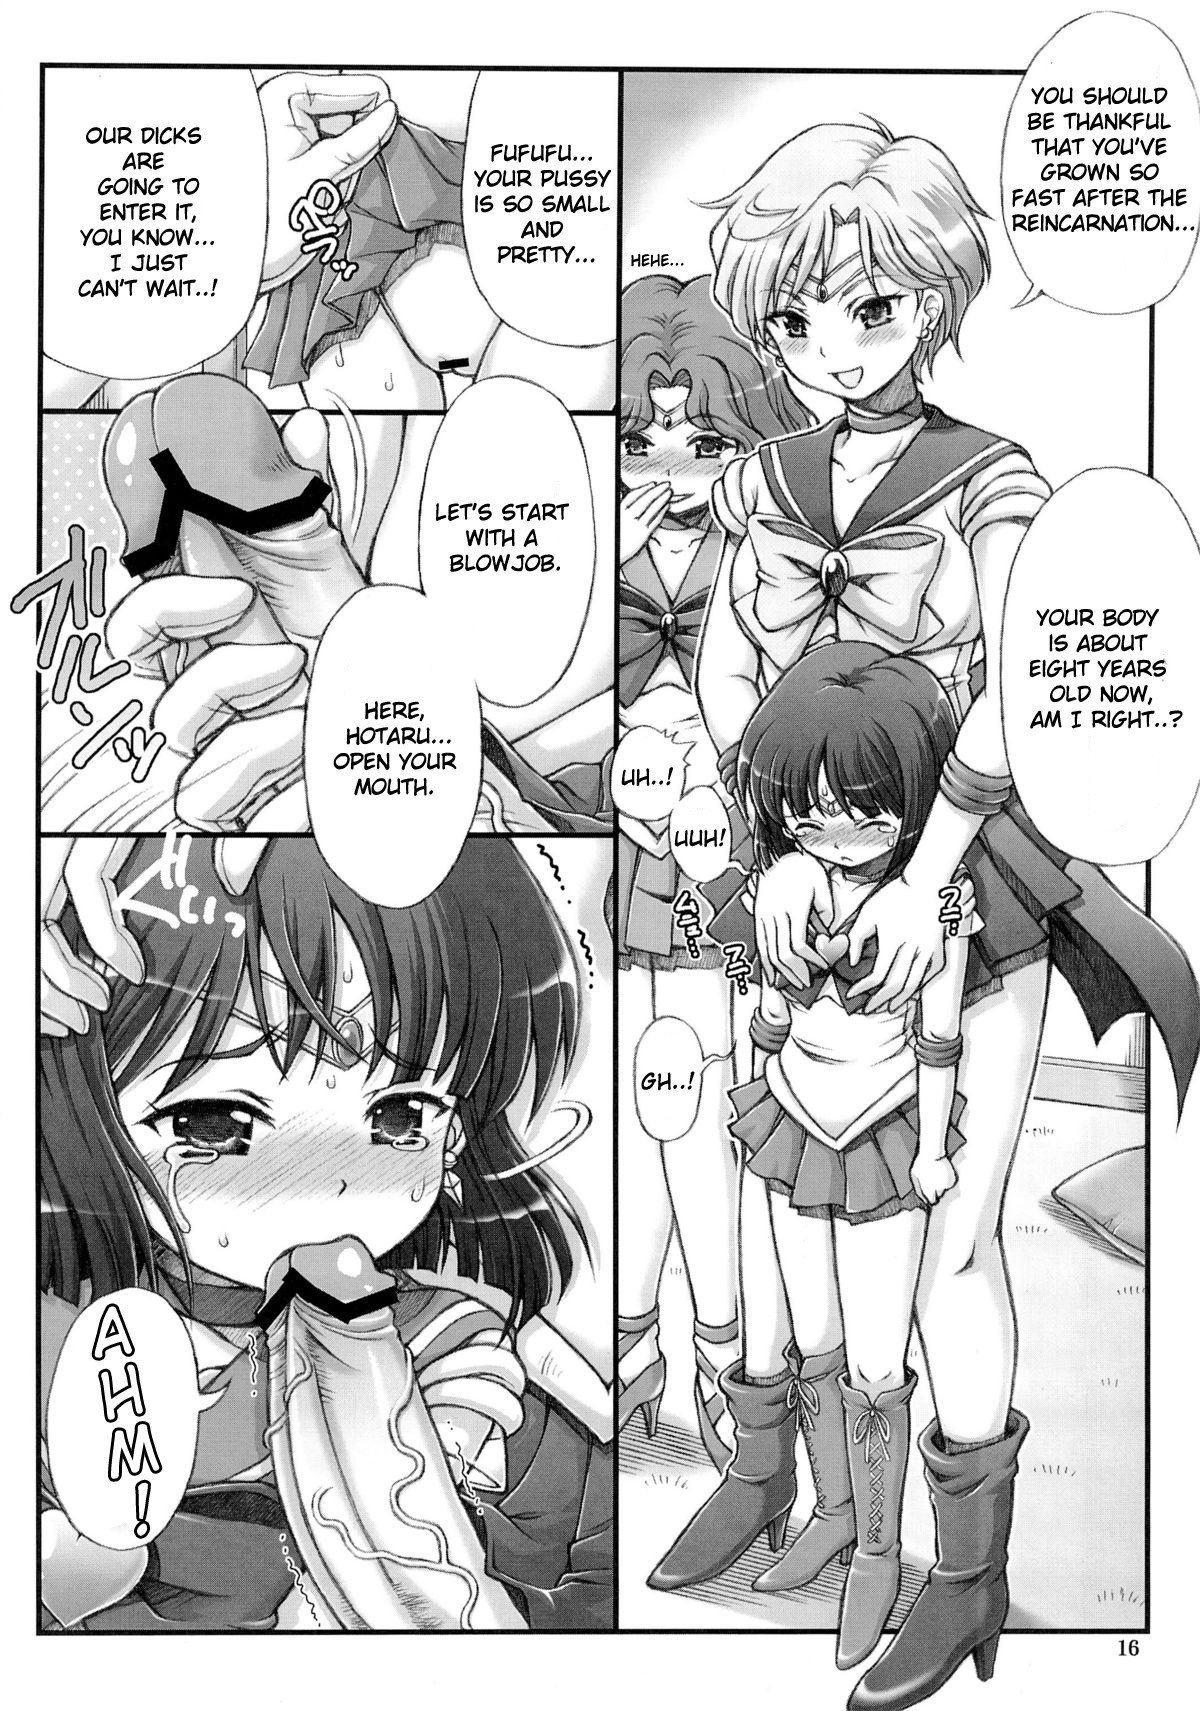 Sailor Delivery Health hentai manga picture 16